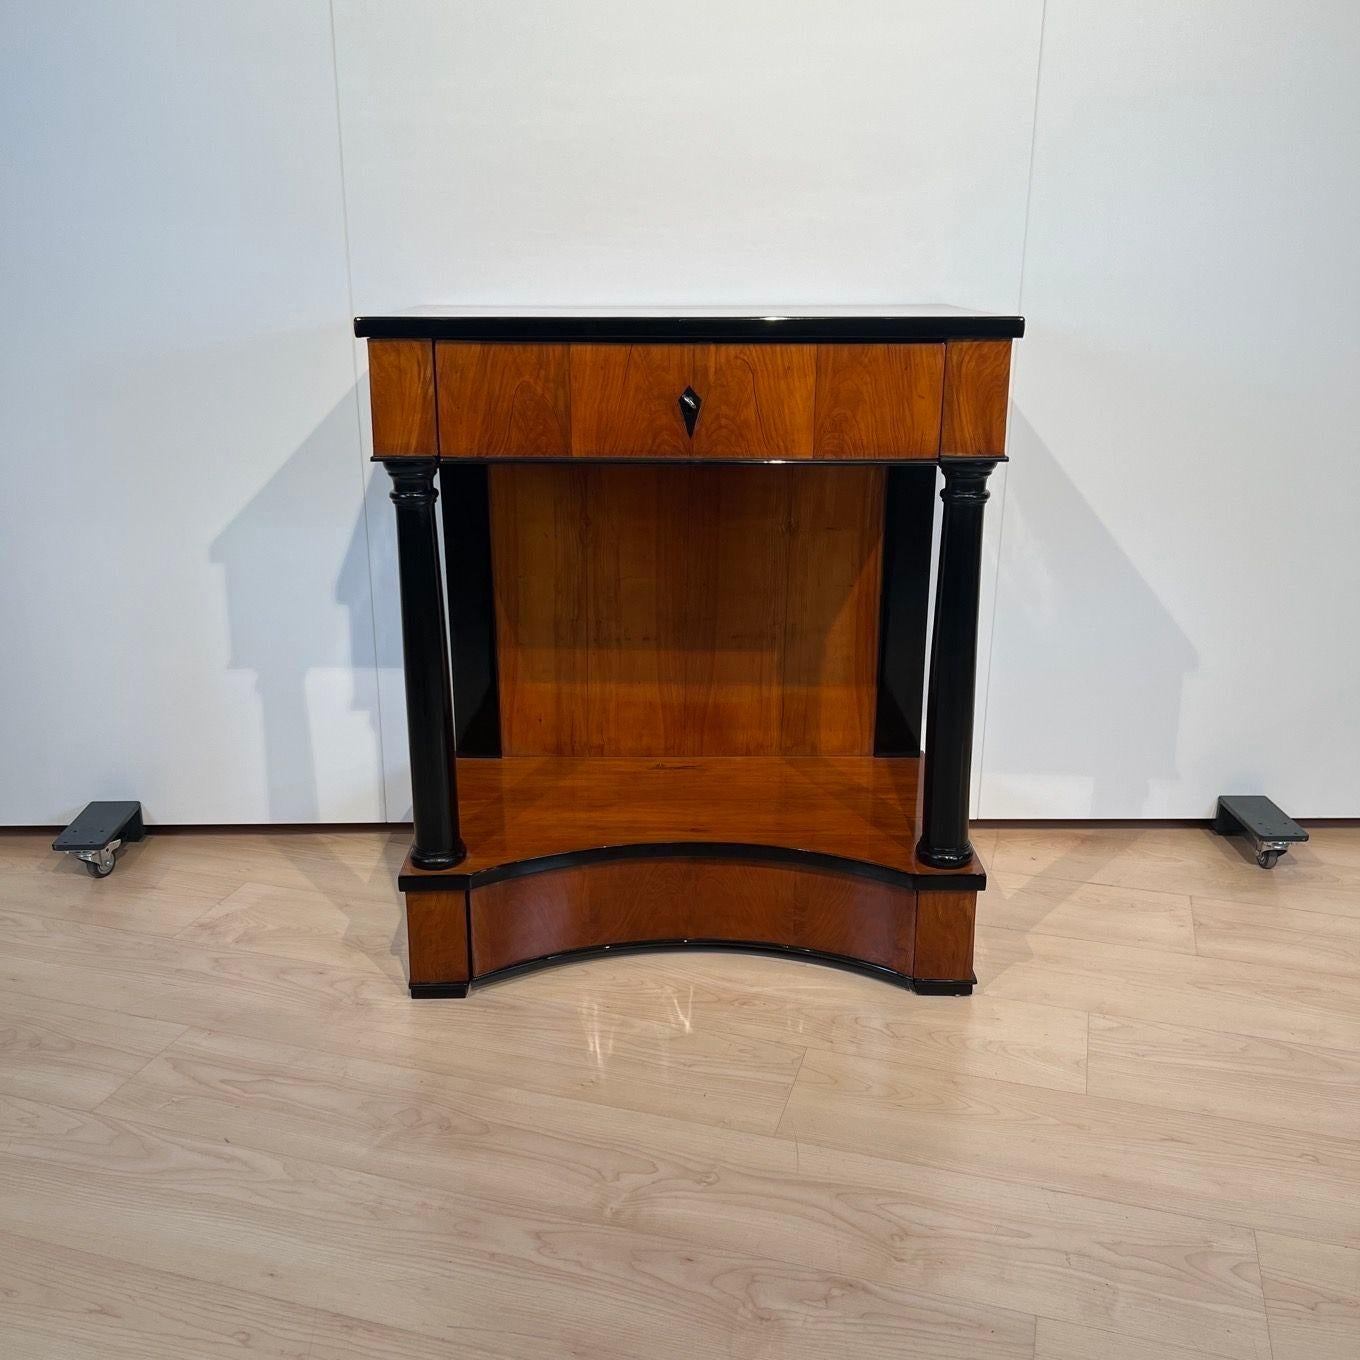 Fine, early Biedermeier / Empire Console table from Southern Germany around 1820.
Blonde cherry wood veneered on softwood and cherry solid wood, partly ebonized. Two thick round ebonized full columns.
Above one drawer with original lock and hidden